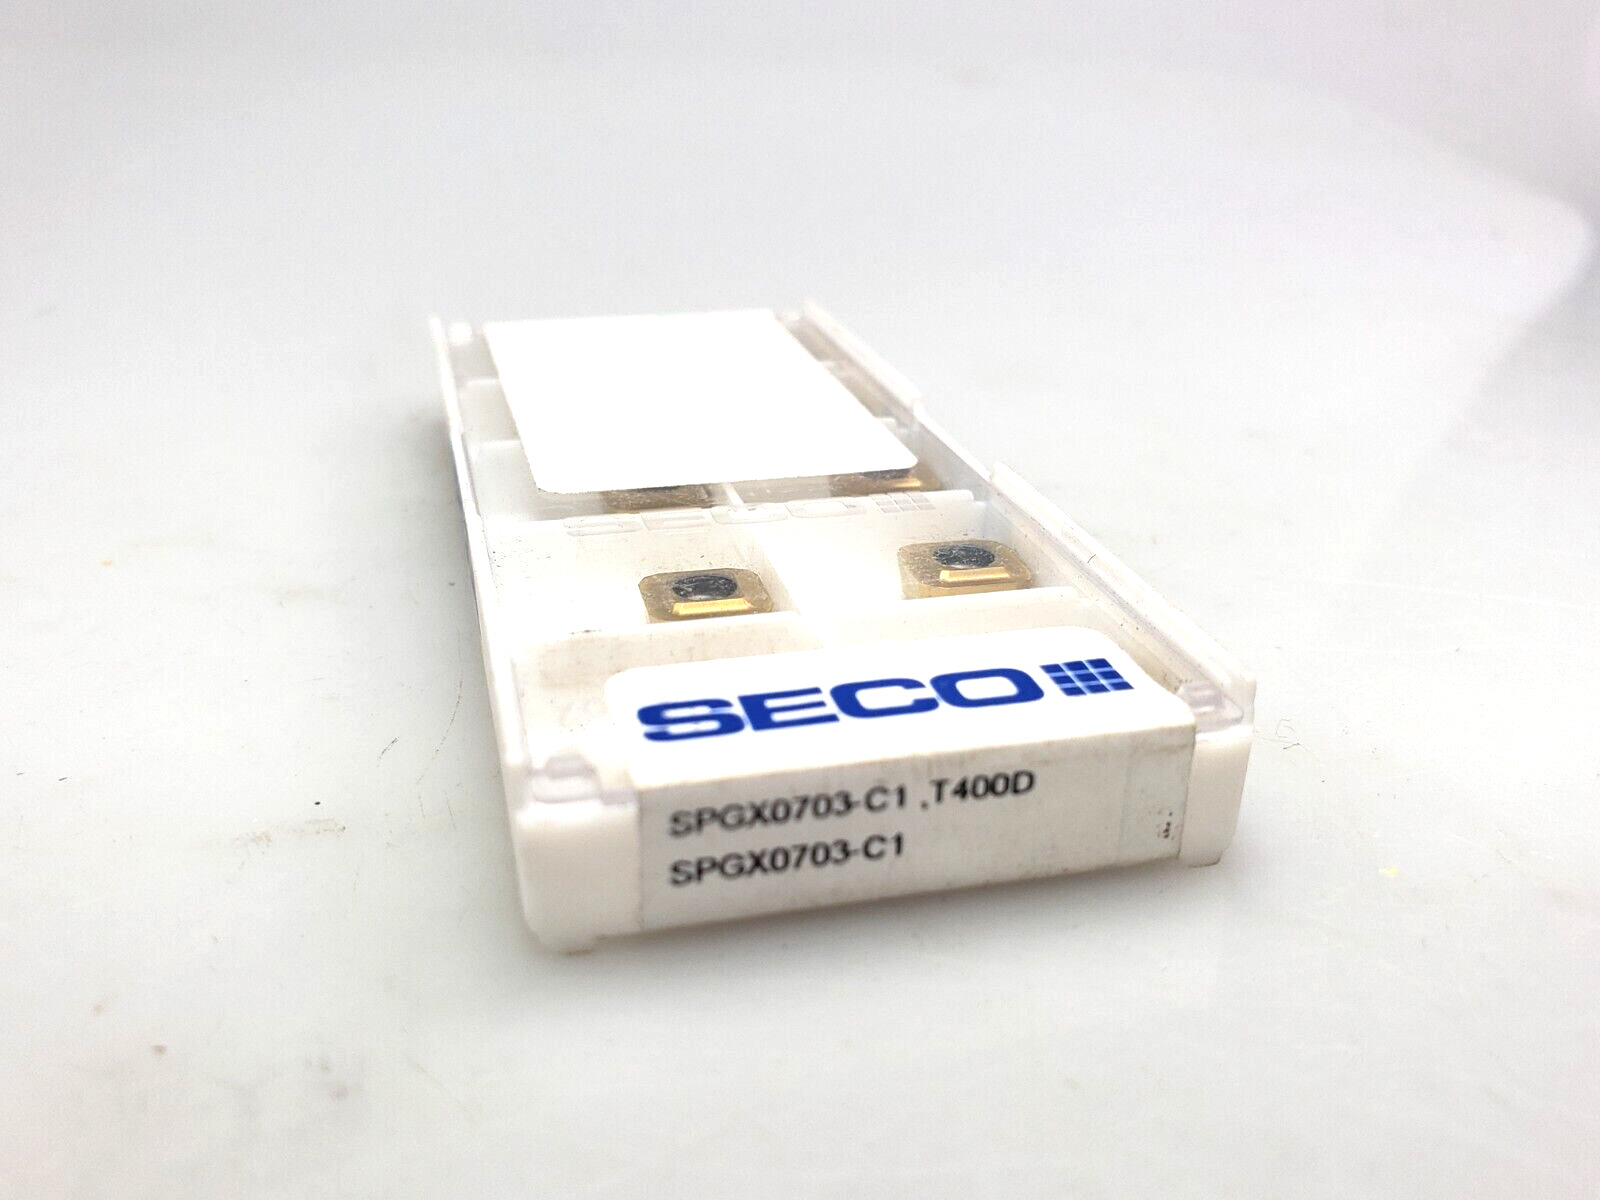 SECO SPGX 0703-C1 T400D Carbide Drilling Inserts (Box of 10)